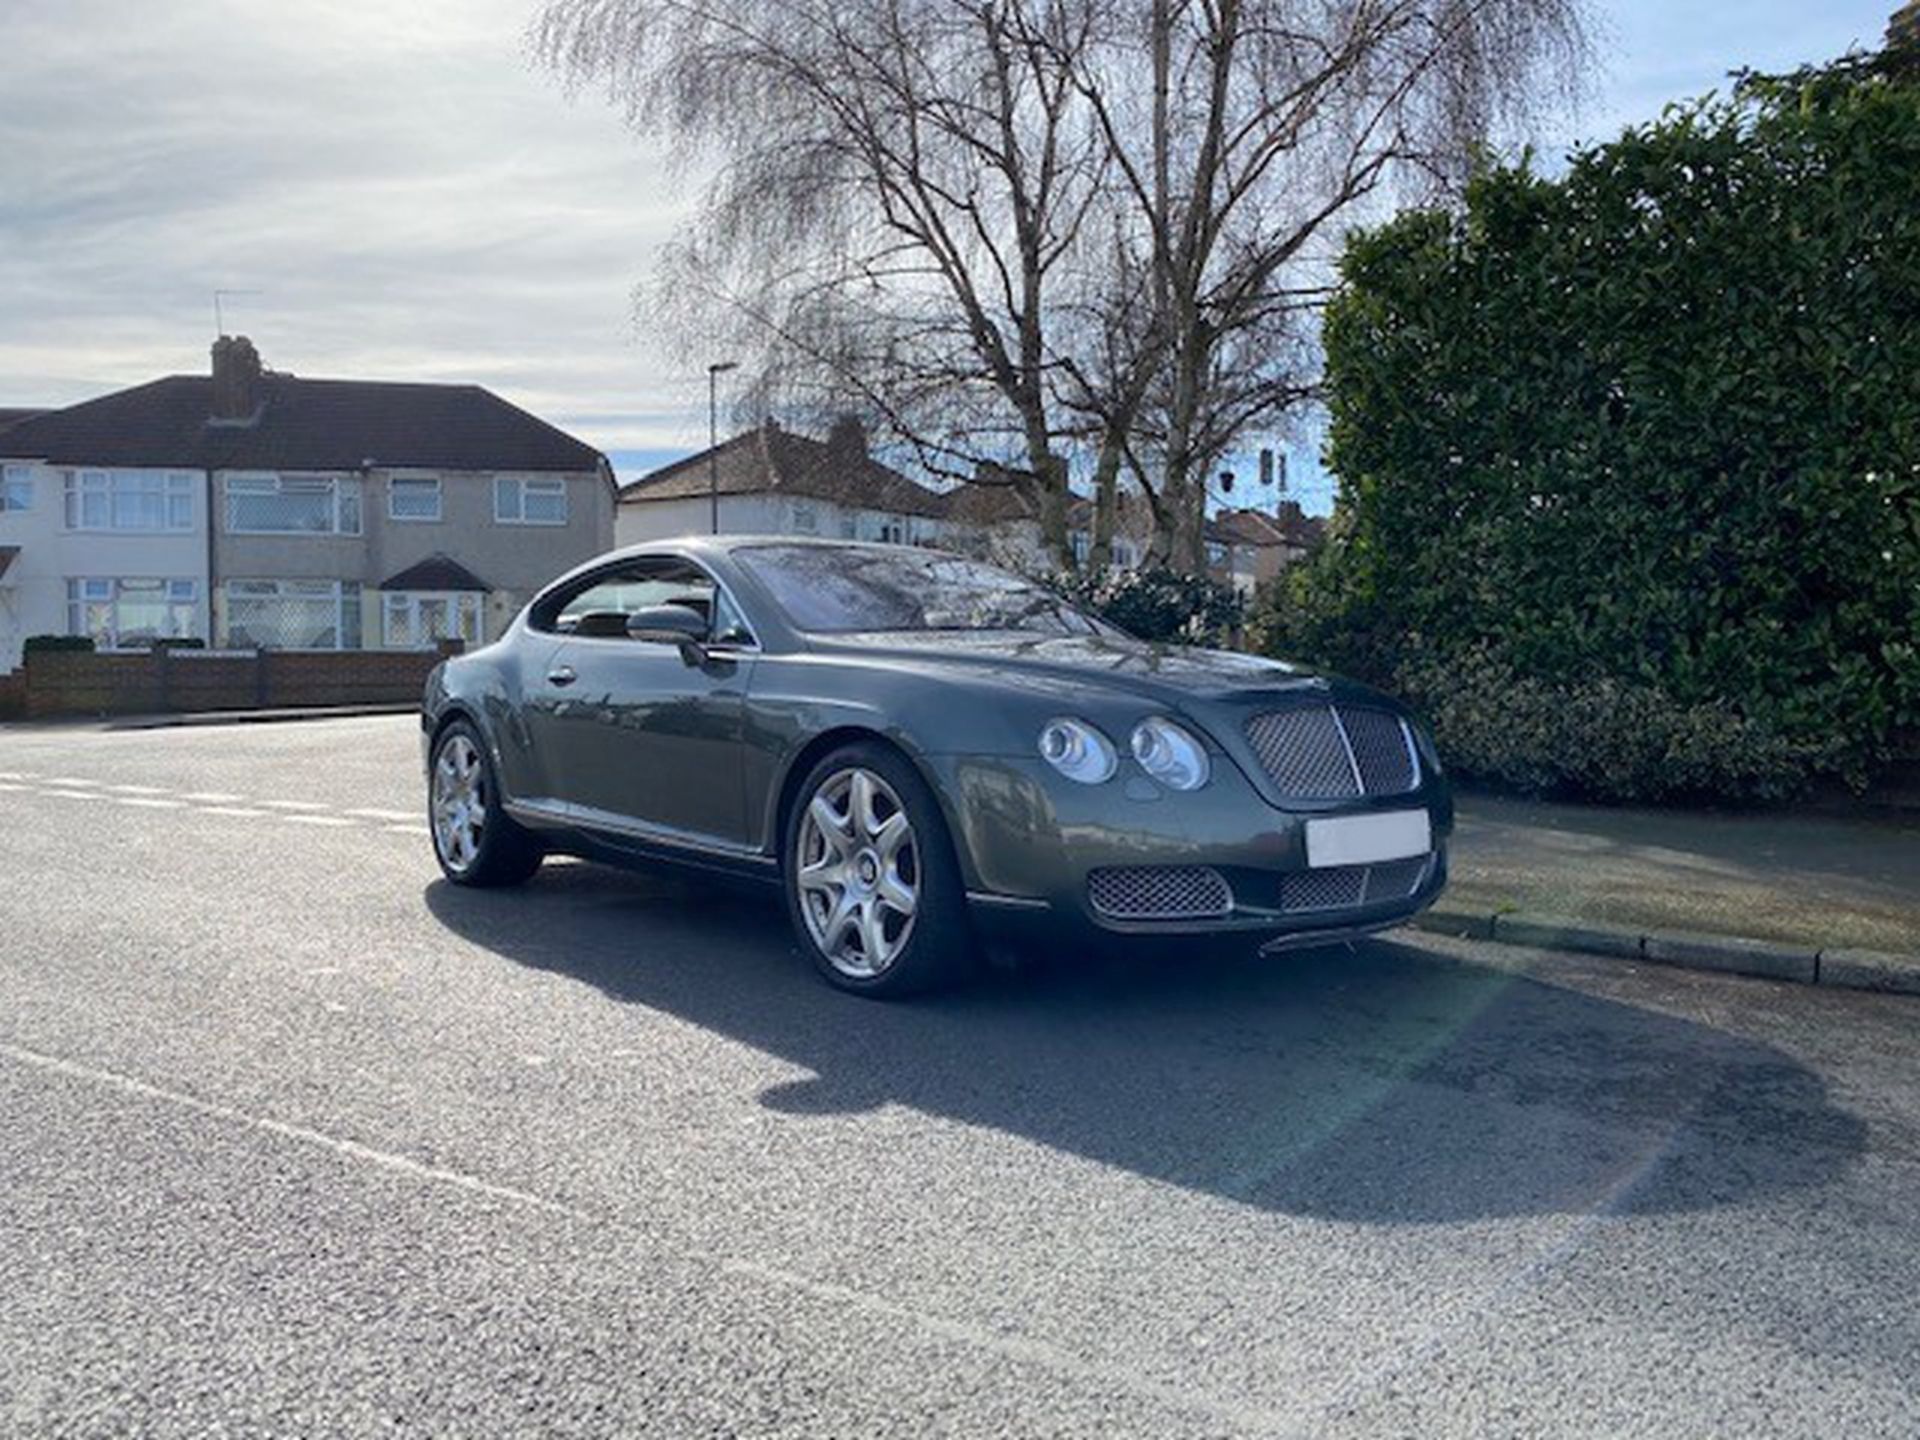 2003 Bentley Continental GT Chassis no. SCBCE63W84CO20055